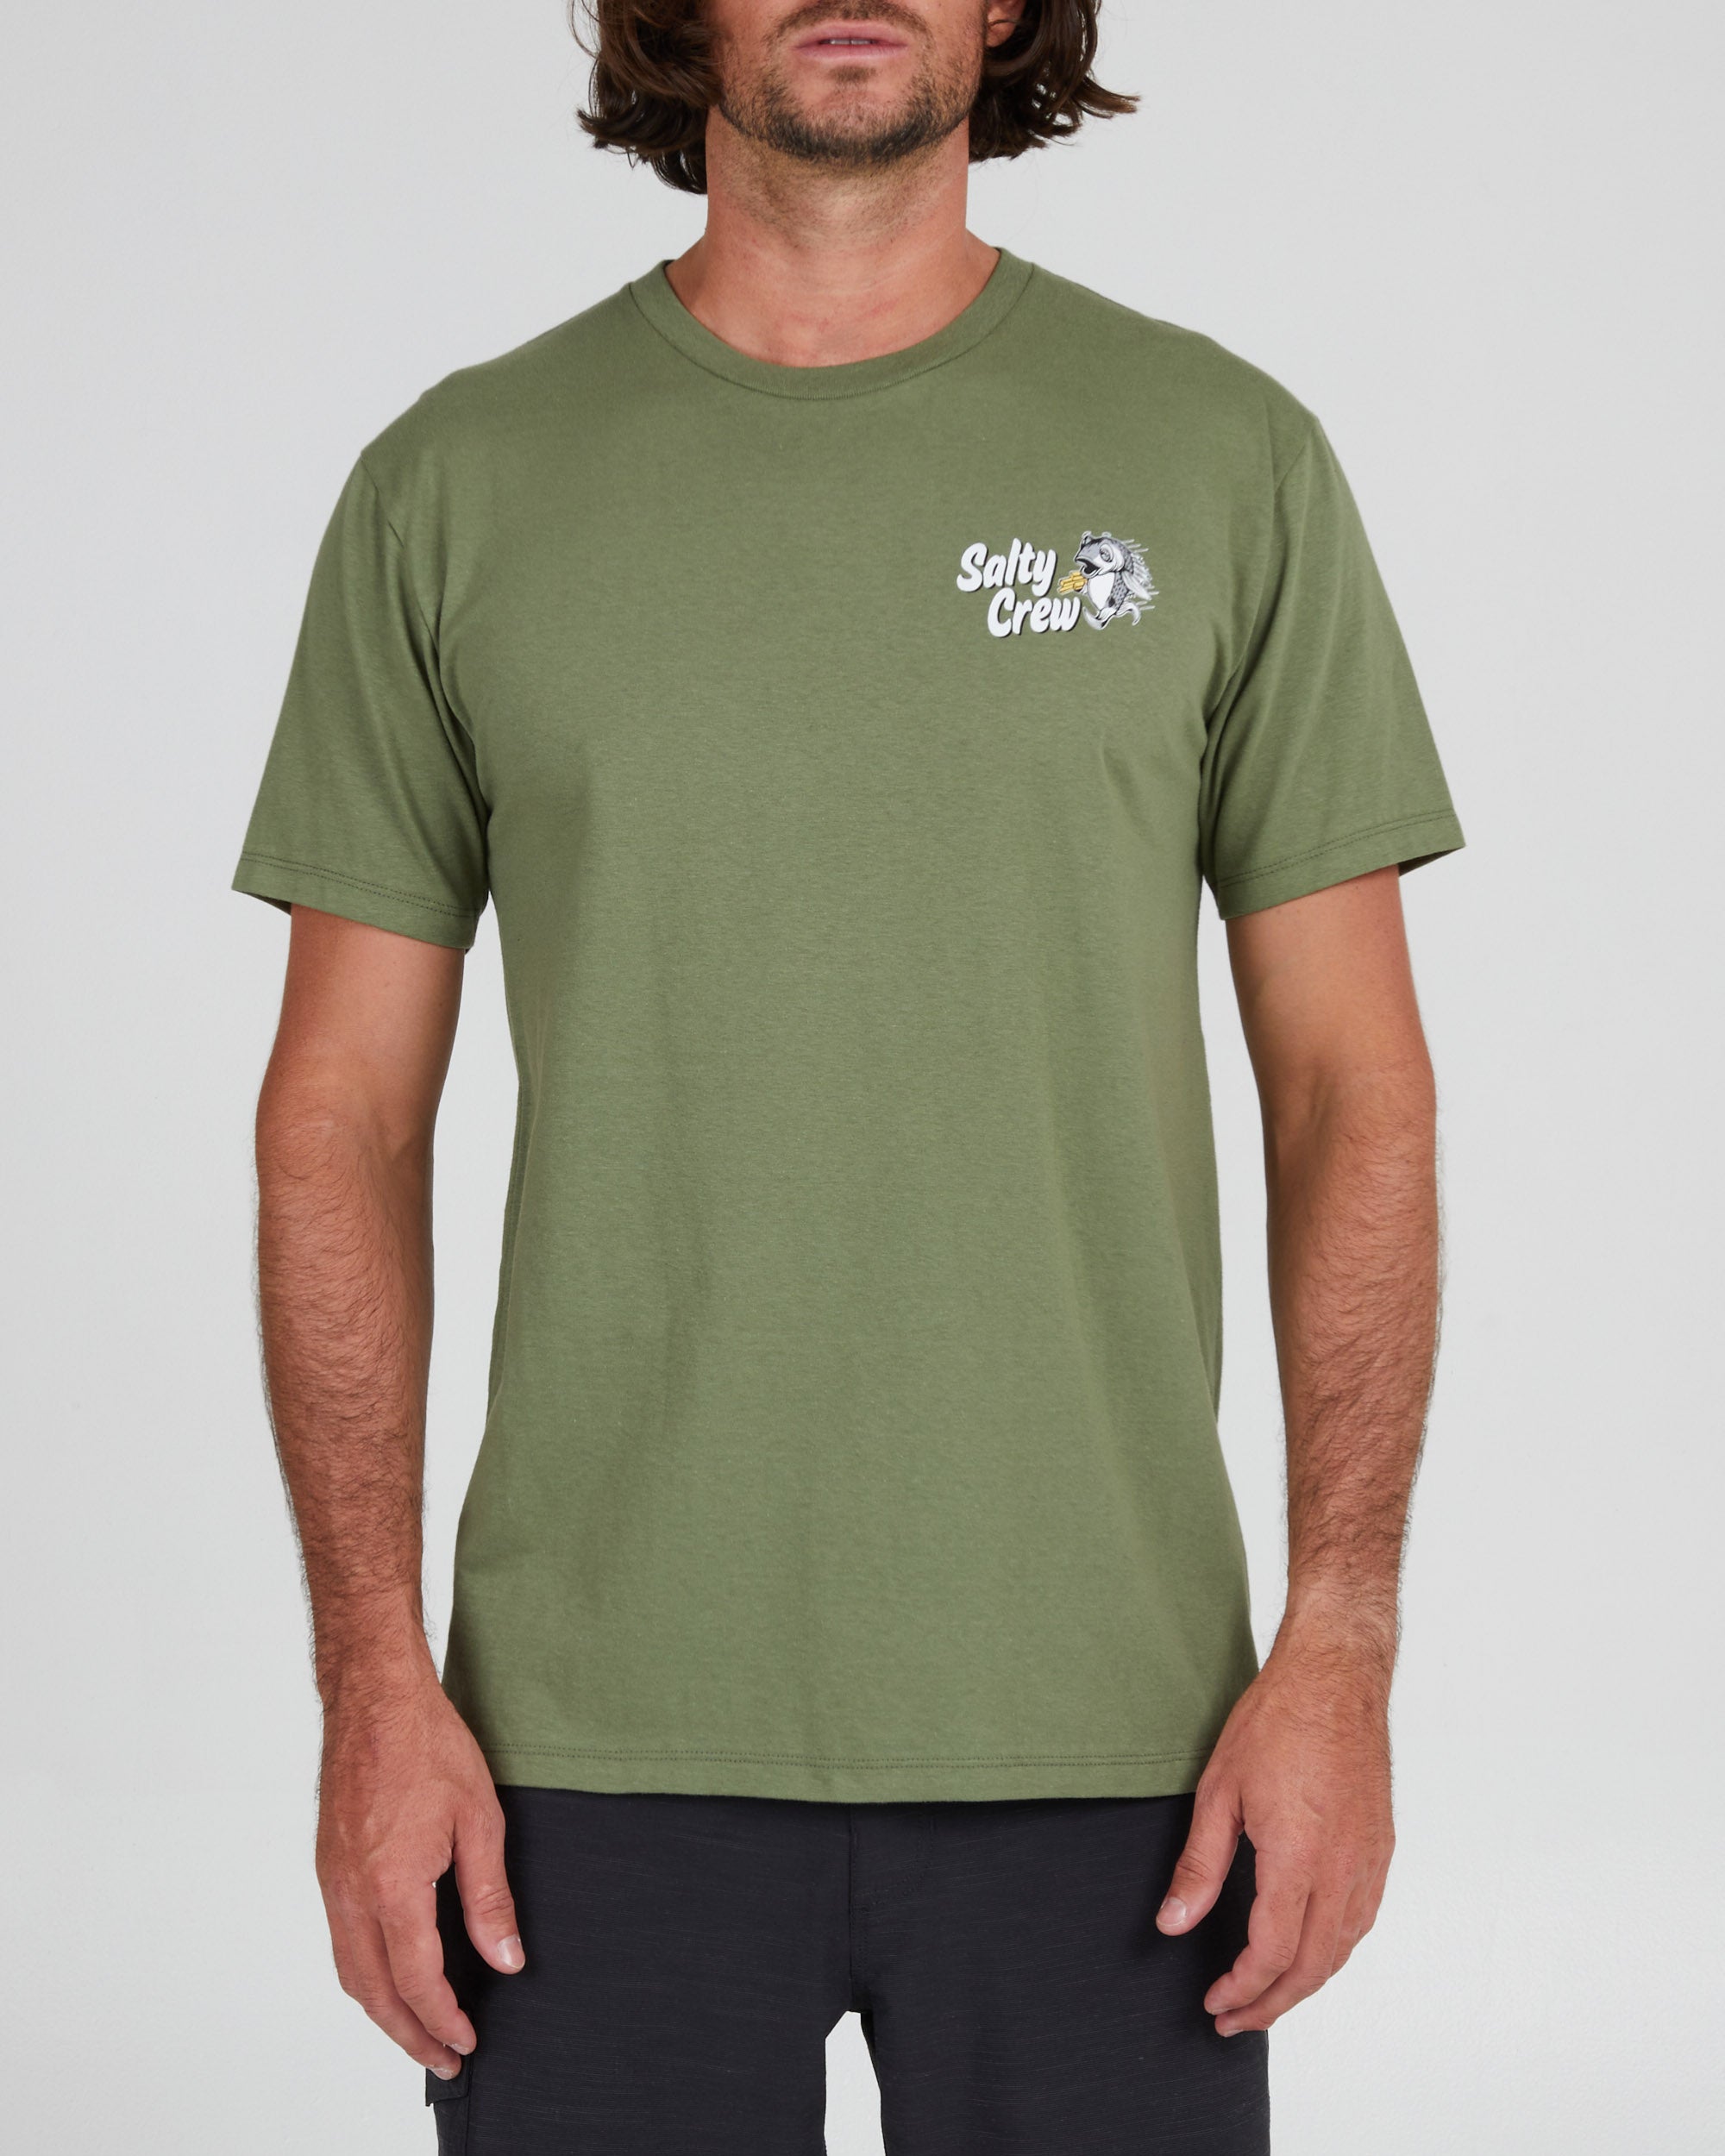 Salty Crew - Fish and Chips Premium Short Sleeve Tee